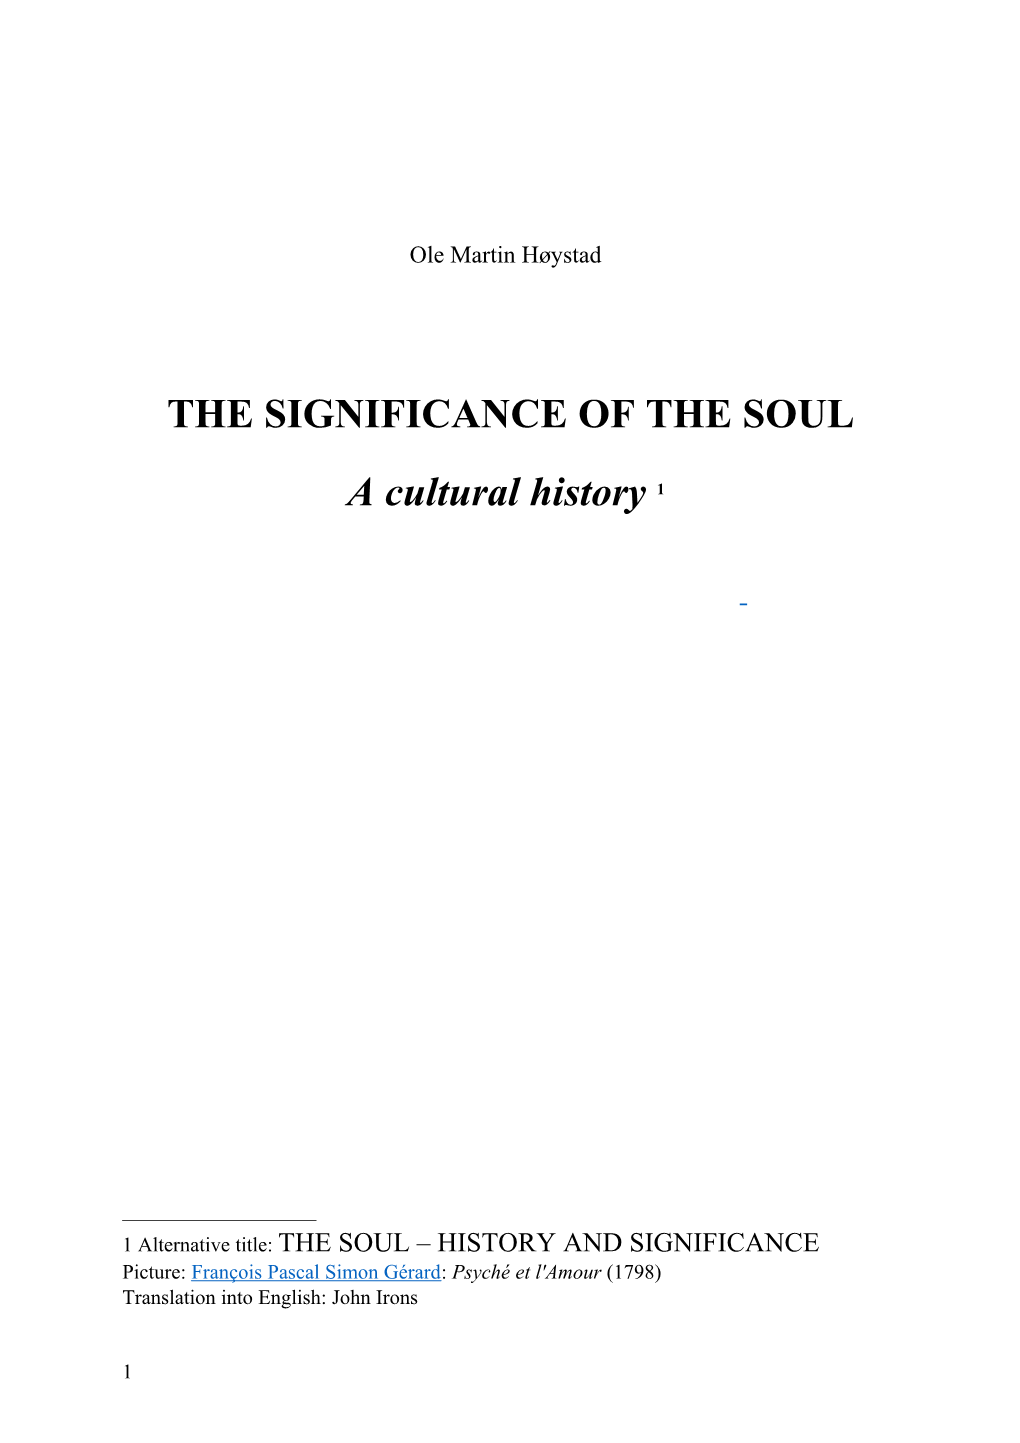 The Significance of the Soul